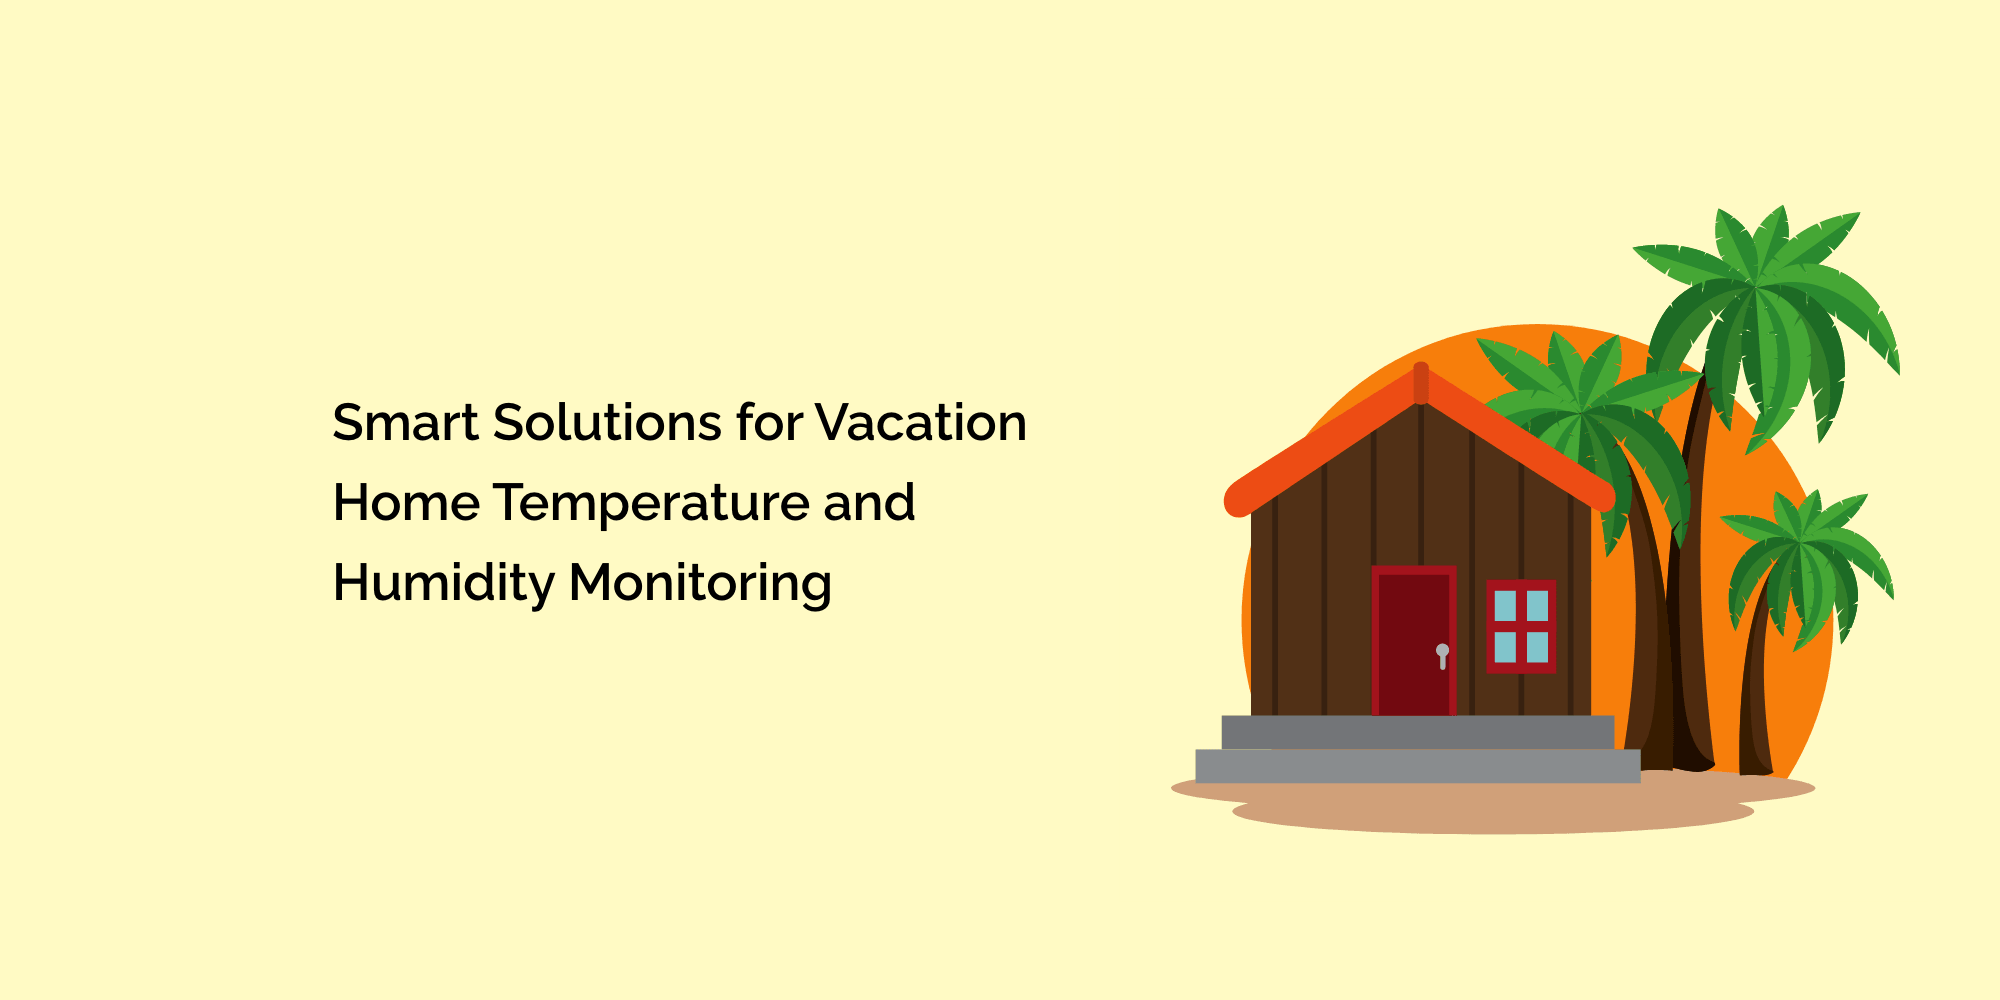 Smart Solutions for Vacation Home Temperature and Humidity Monitoring